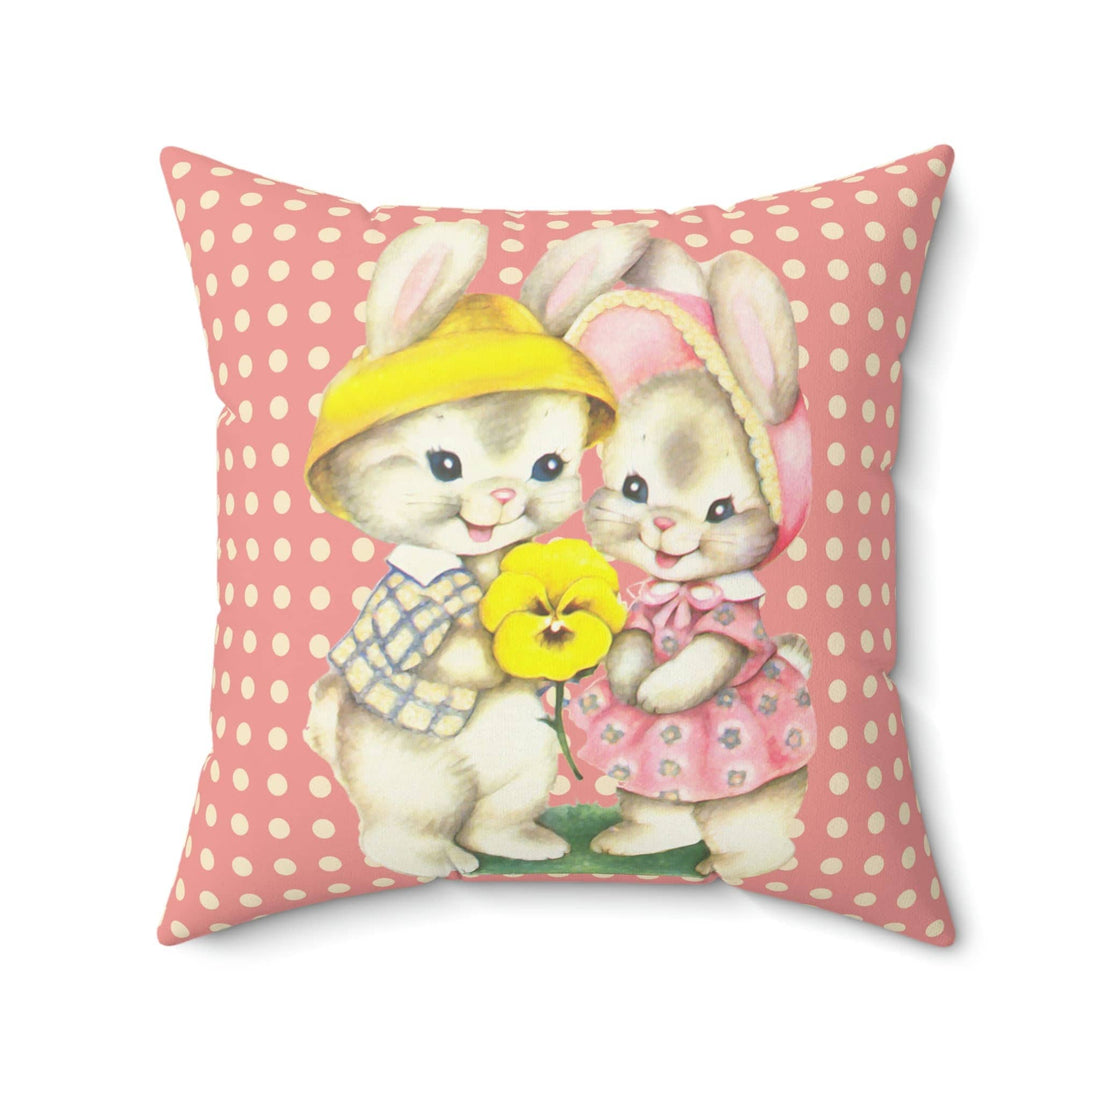 Kate McEnroe New York Vintage Easter Bunny Rabbits Throw Pillow CoverThrow Pillow Covers28341847967896403729